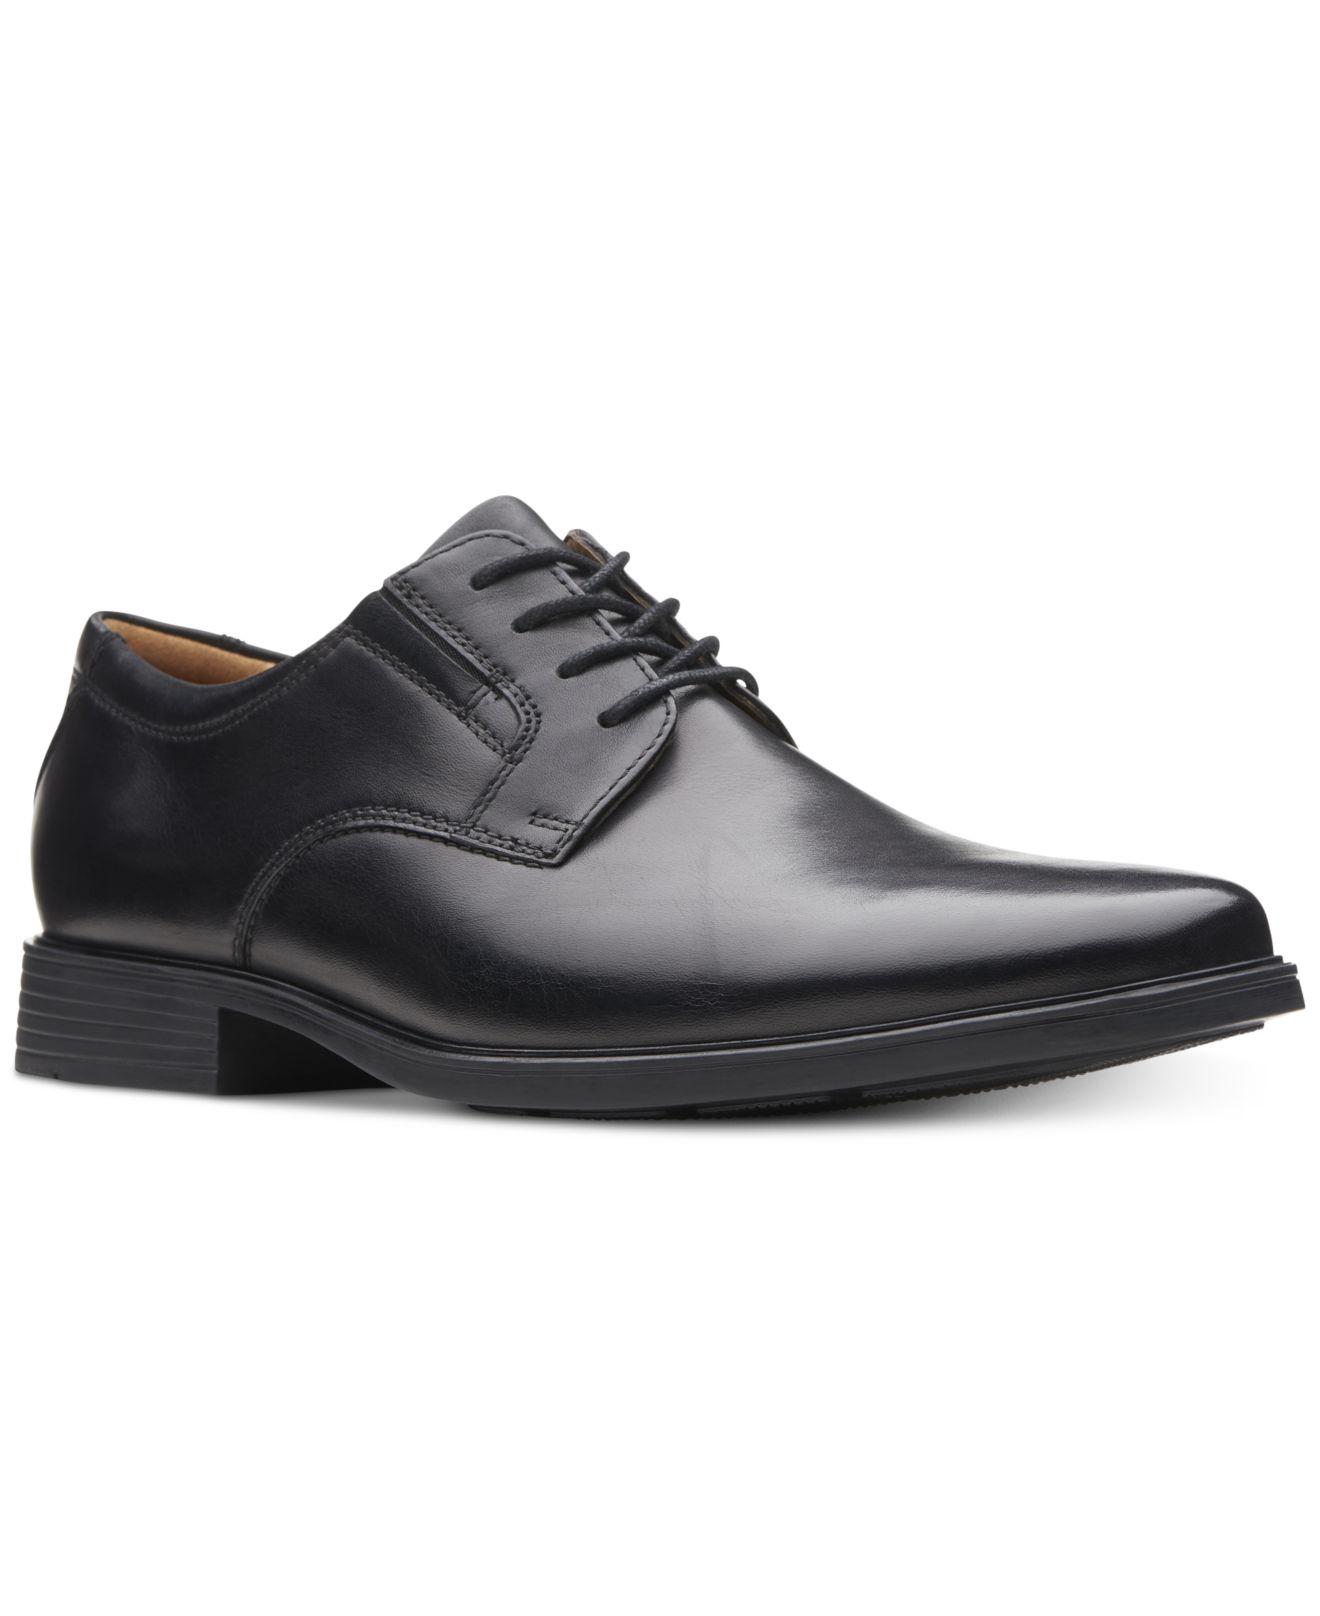 Clarks Shoes Brent Cross Top Sellers, SAVE 58%.